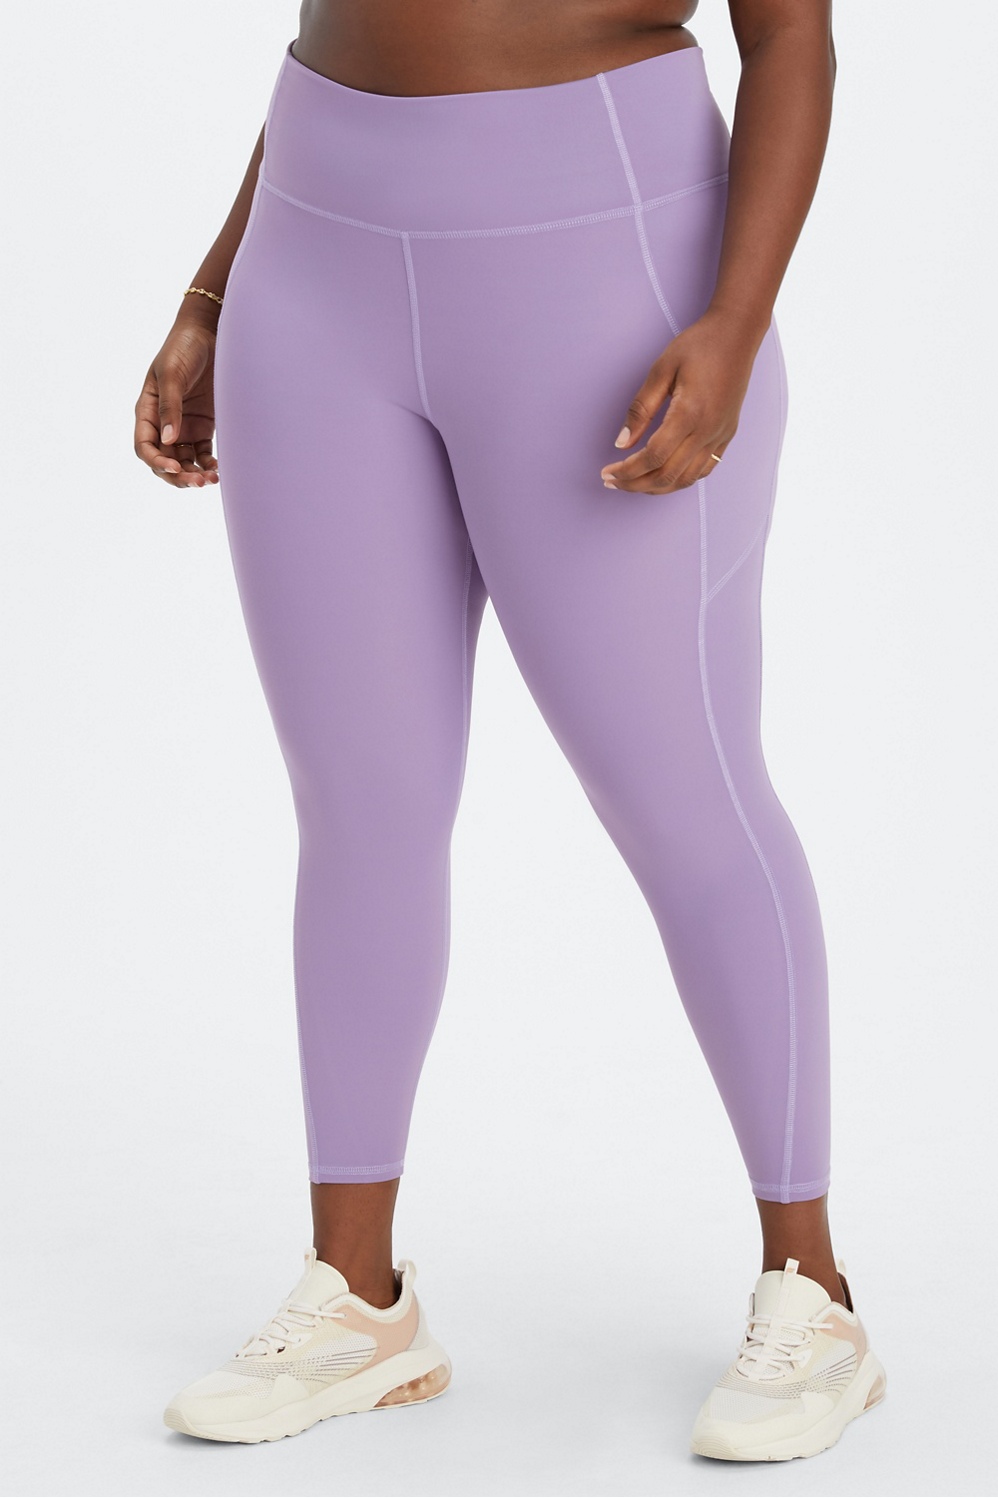 Fabletics - Oasis PureLuxe High-Waisted 7/8 Legging Blue Size M - $55 (26%  Off Retail) New With Tags - From Angie